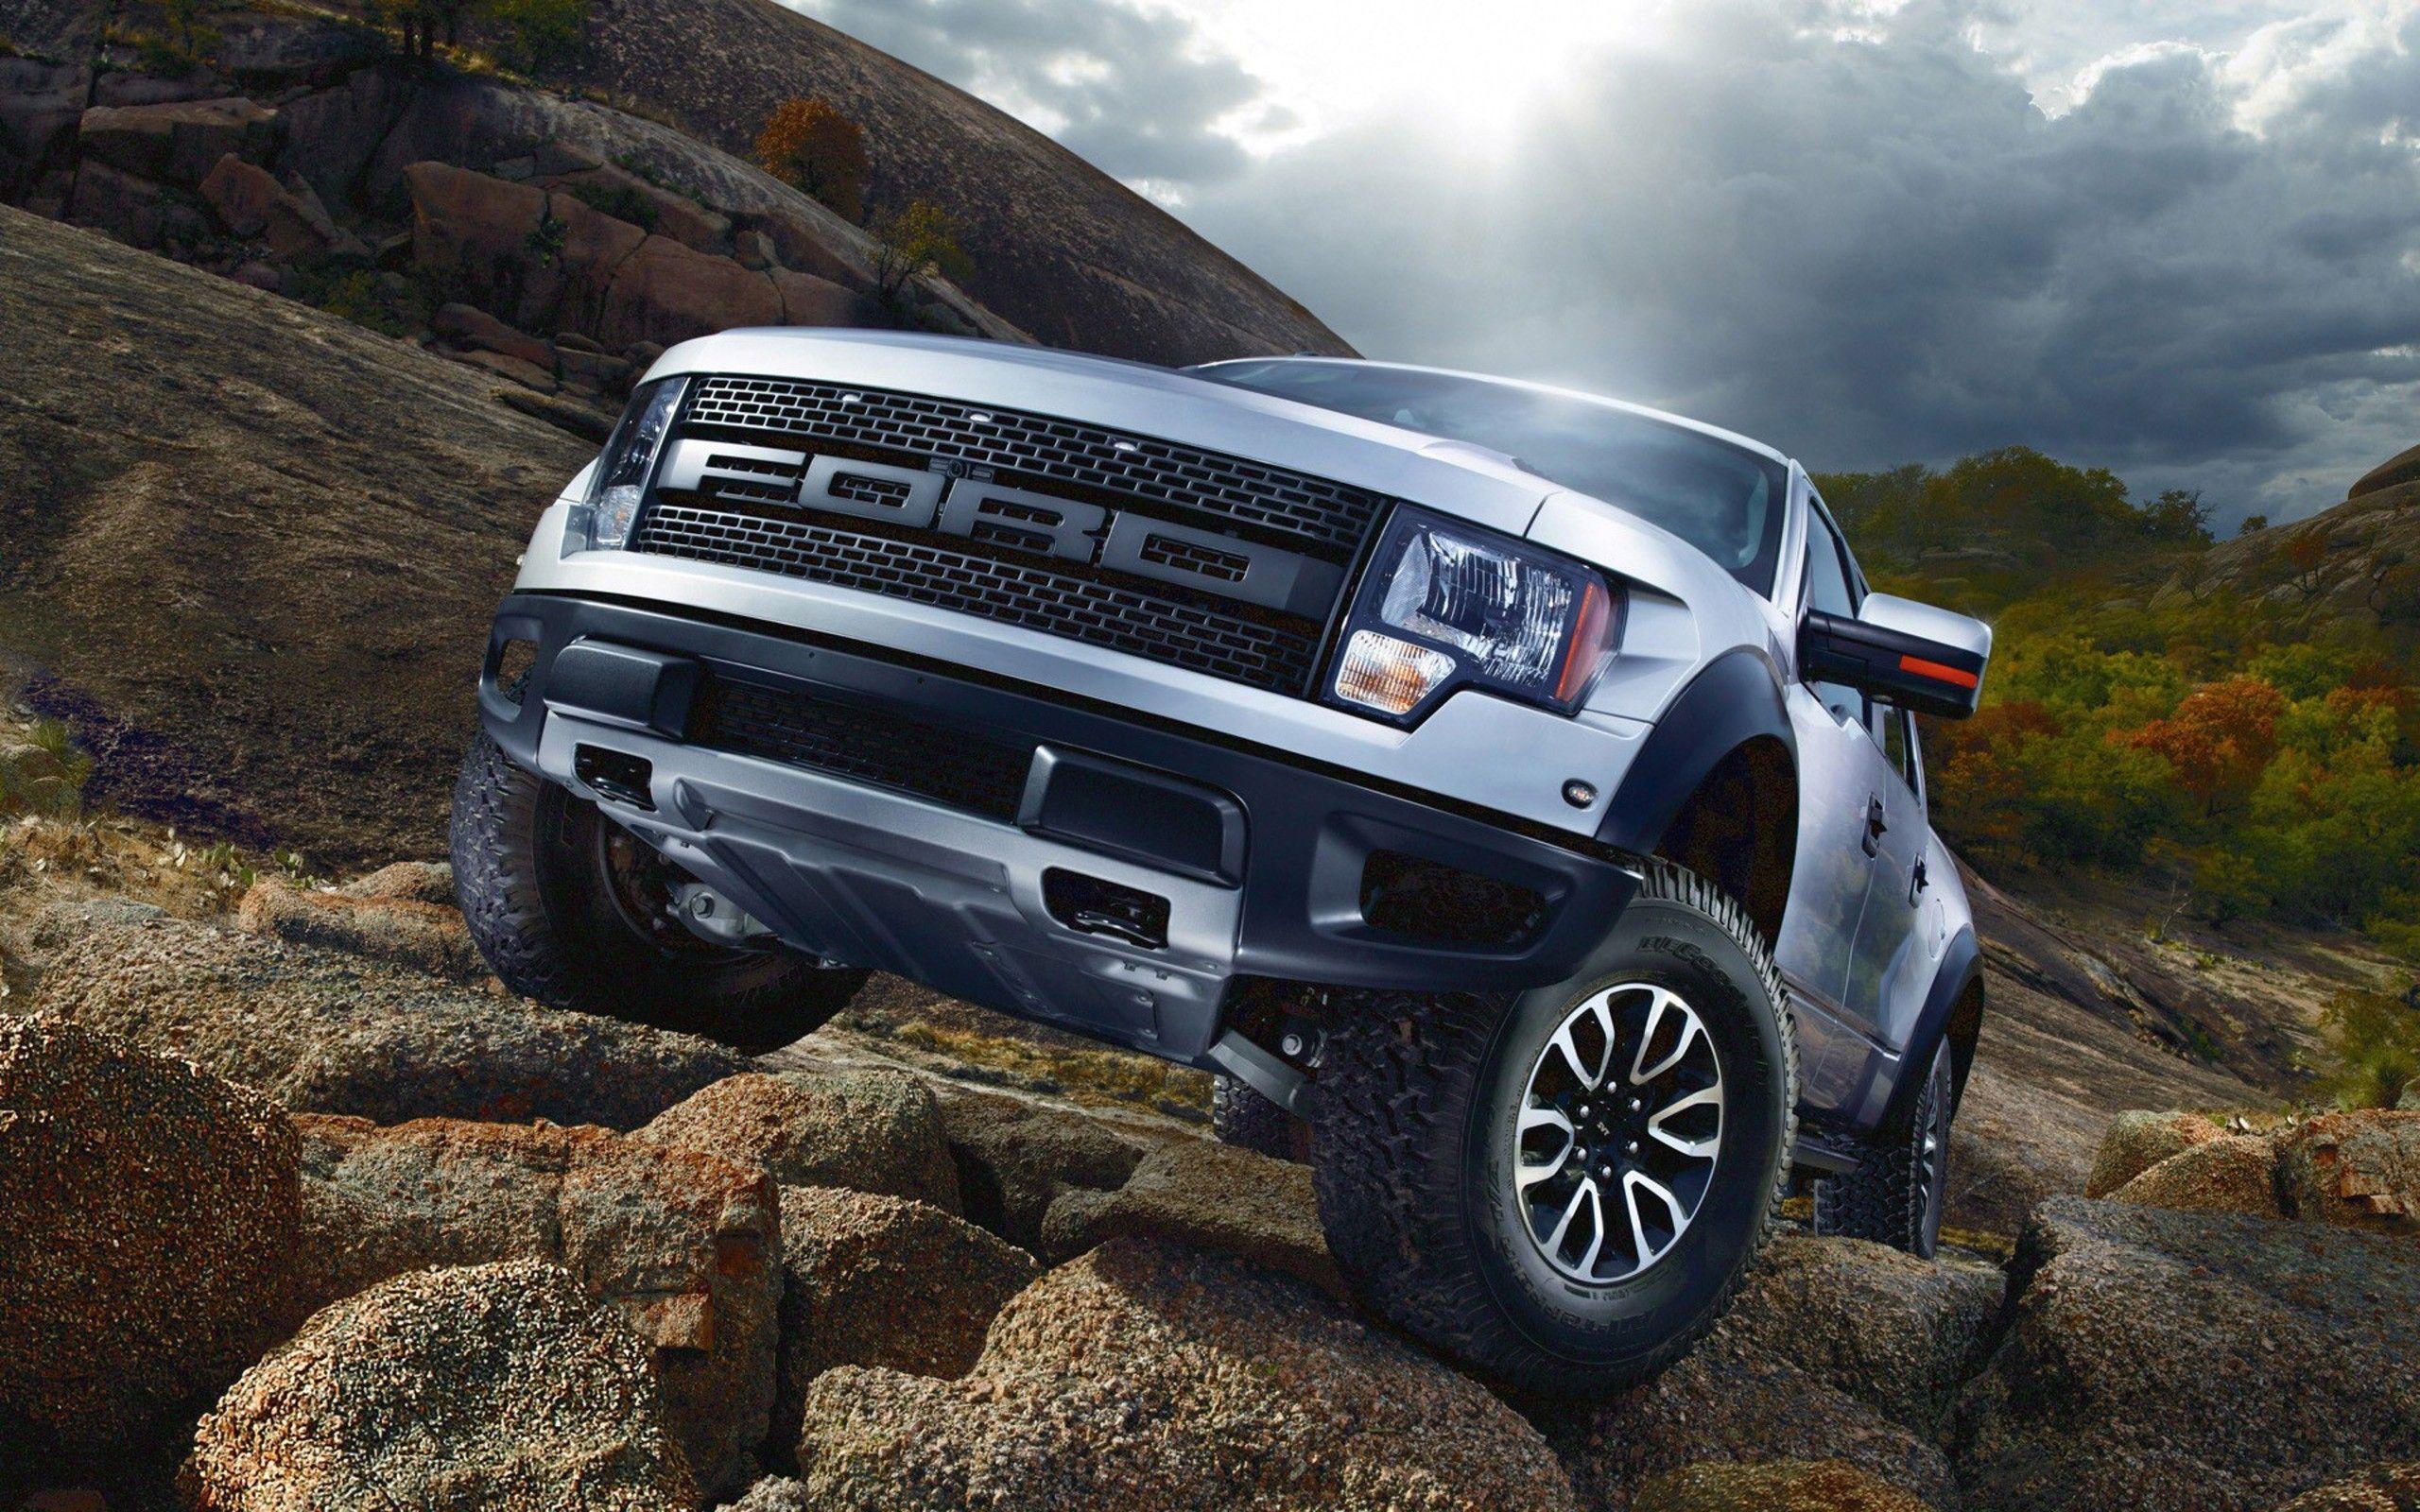 High Definition Ford Truck Wallpaper Cover Background